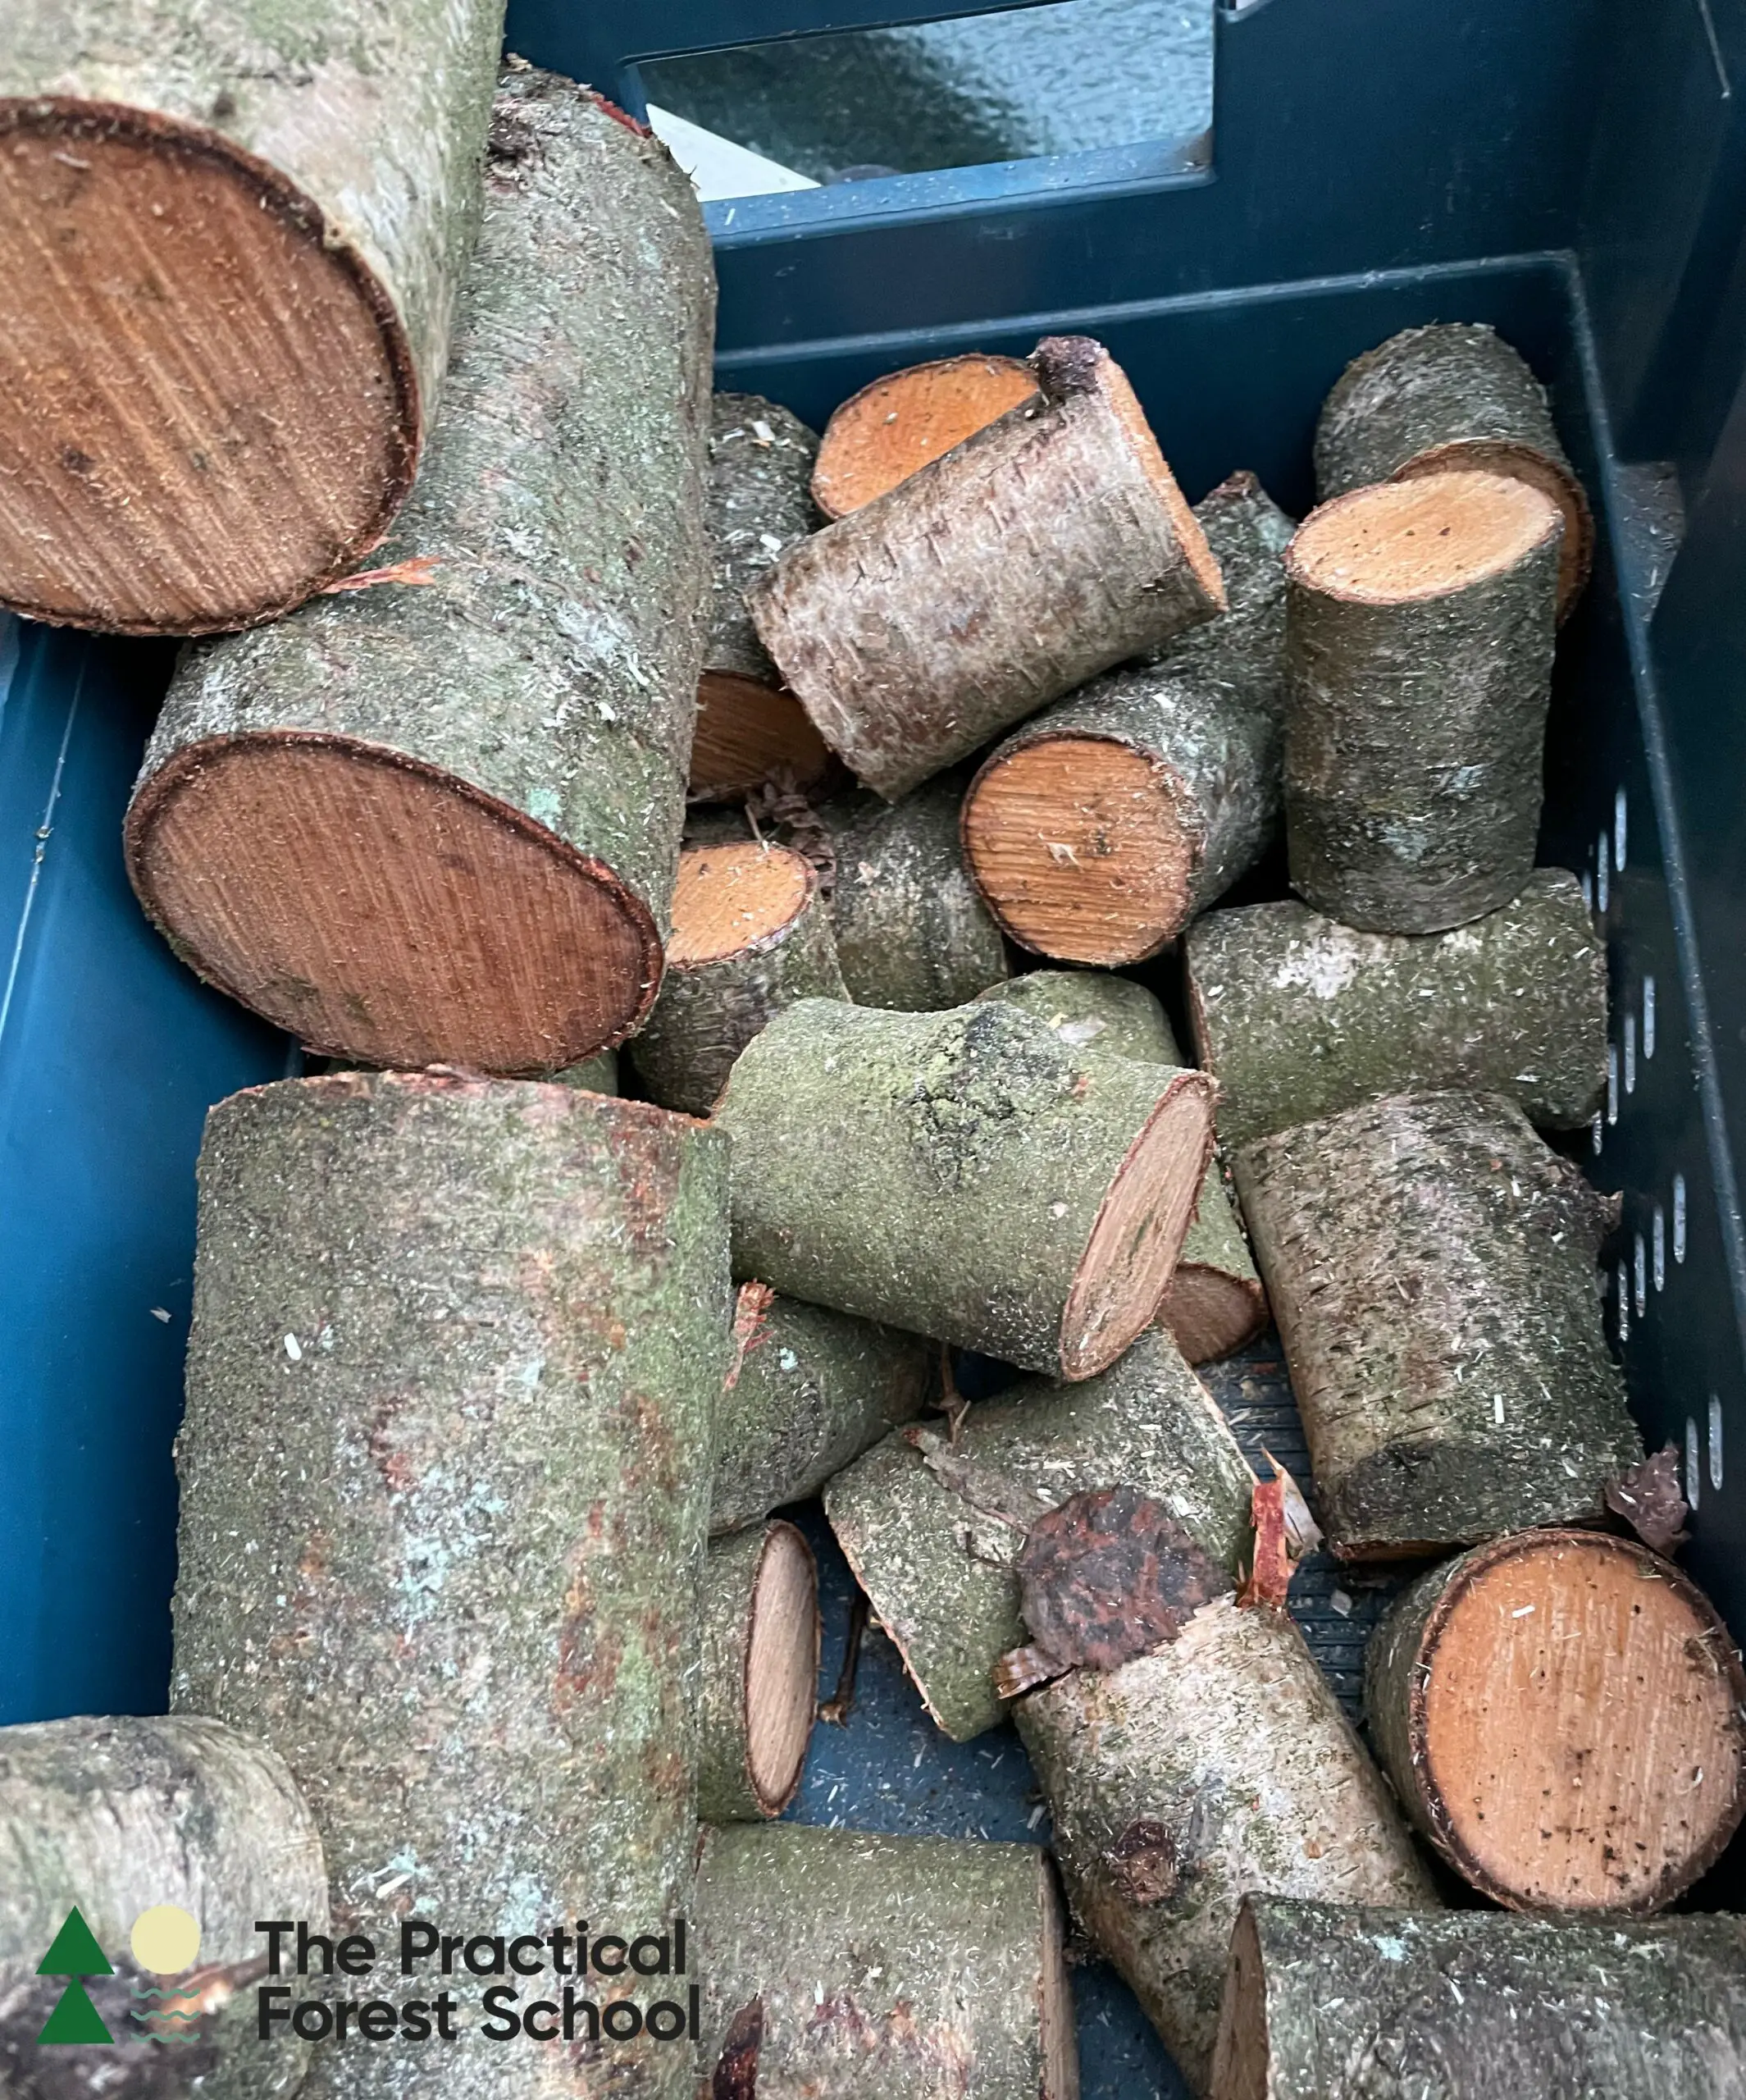 Logs of different sizes in a blue crate